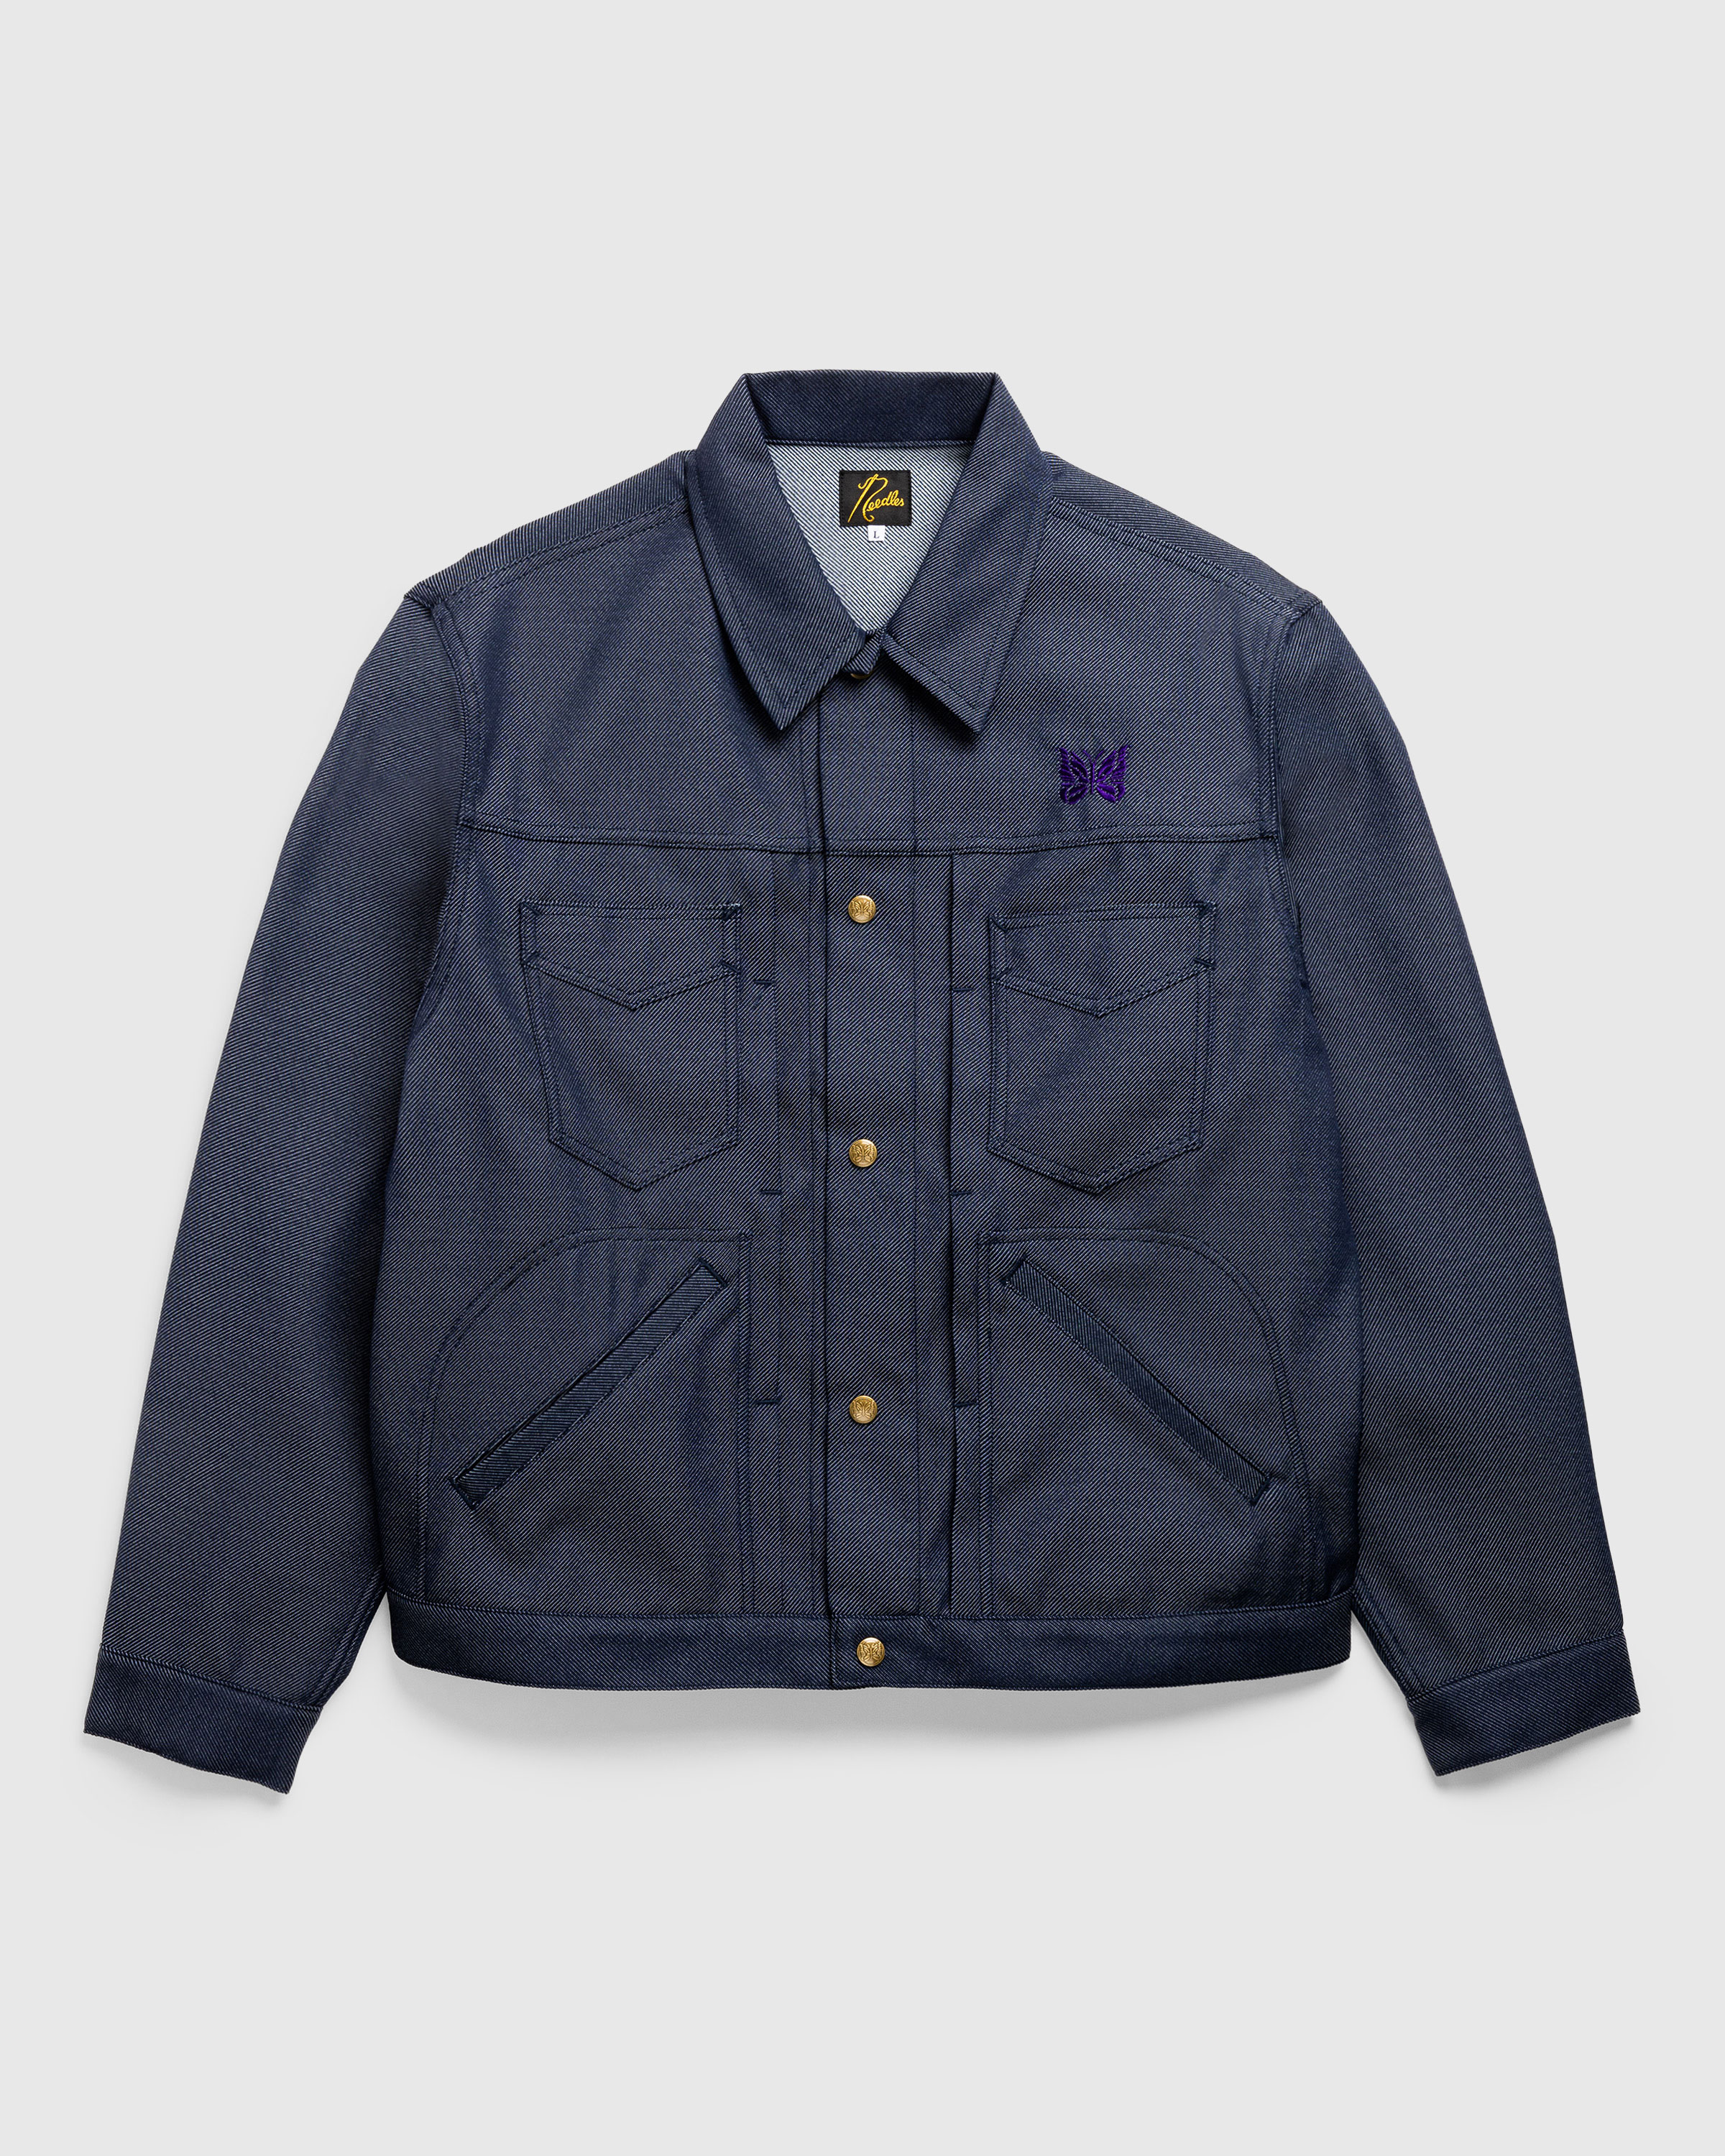 Needles – Penny Jean Jacket Poly Twill Navy - Outerwear - Blue - Image 1